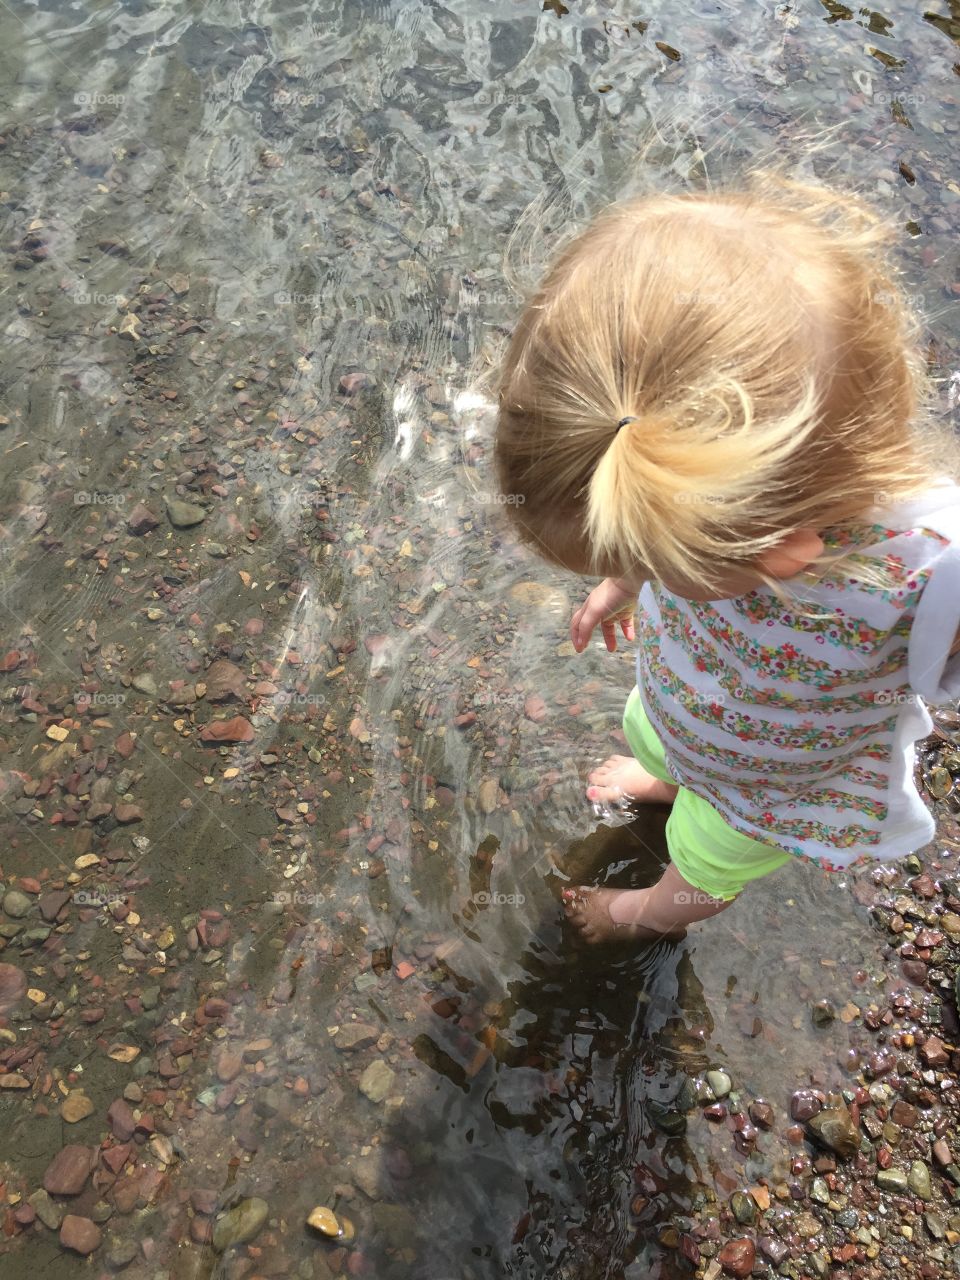 Two-year-old entranced in the cold water numbing her feet.